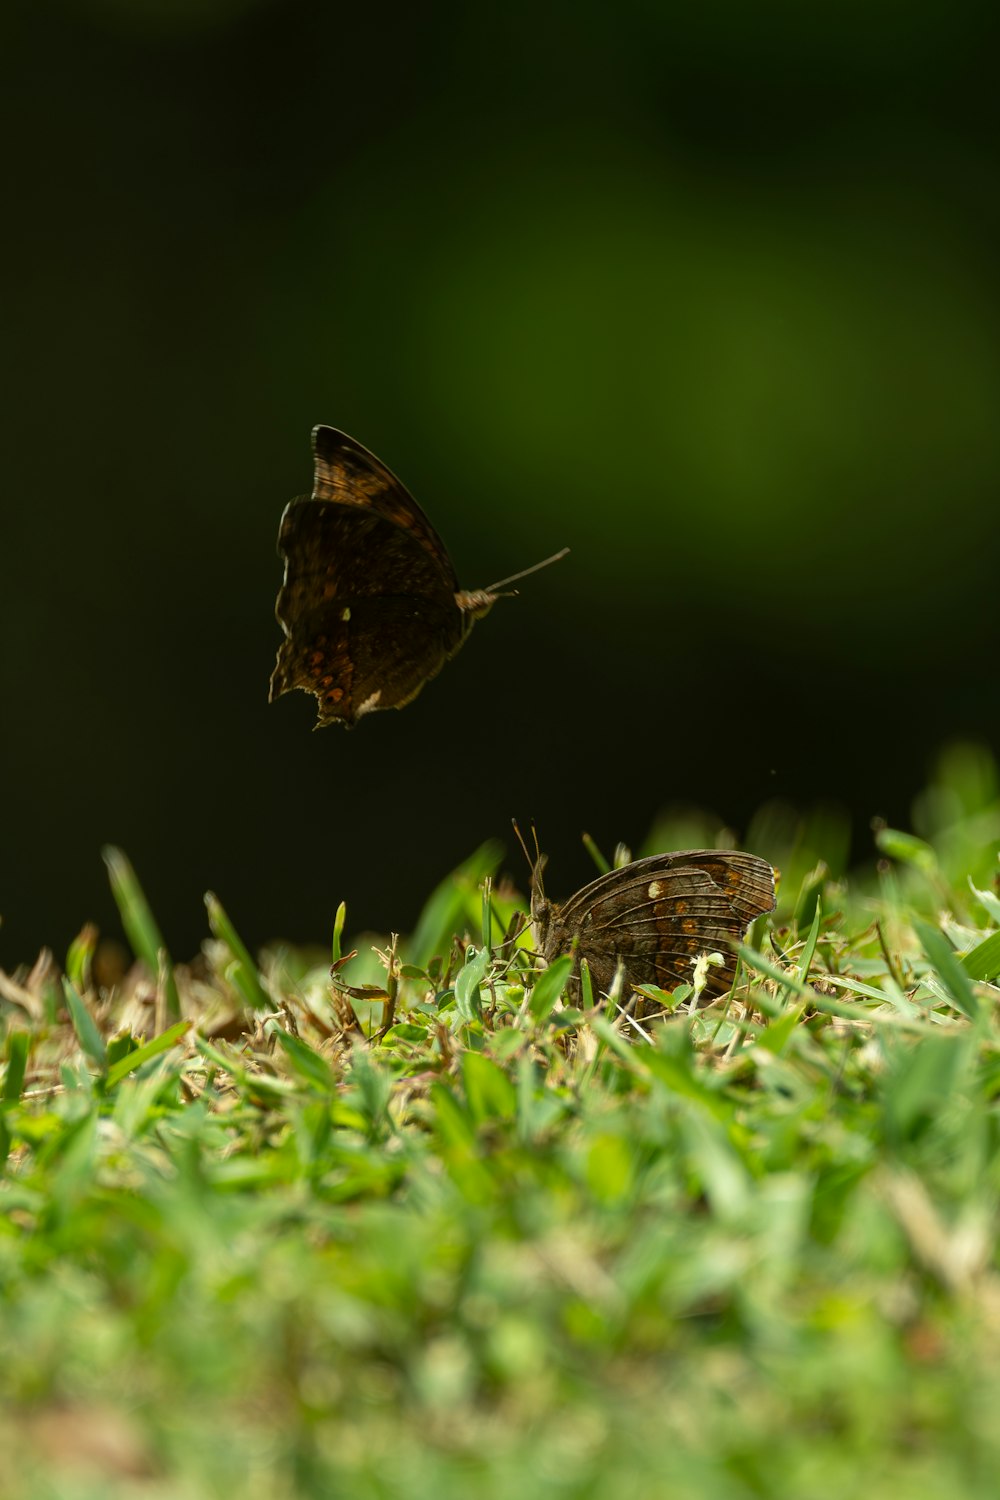 a couple of butterflies flying over a lush green field